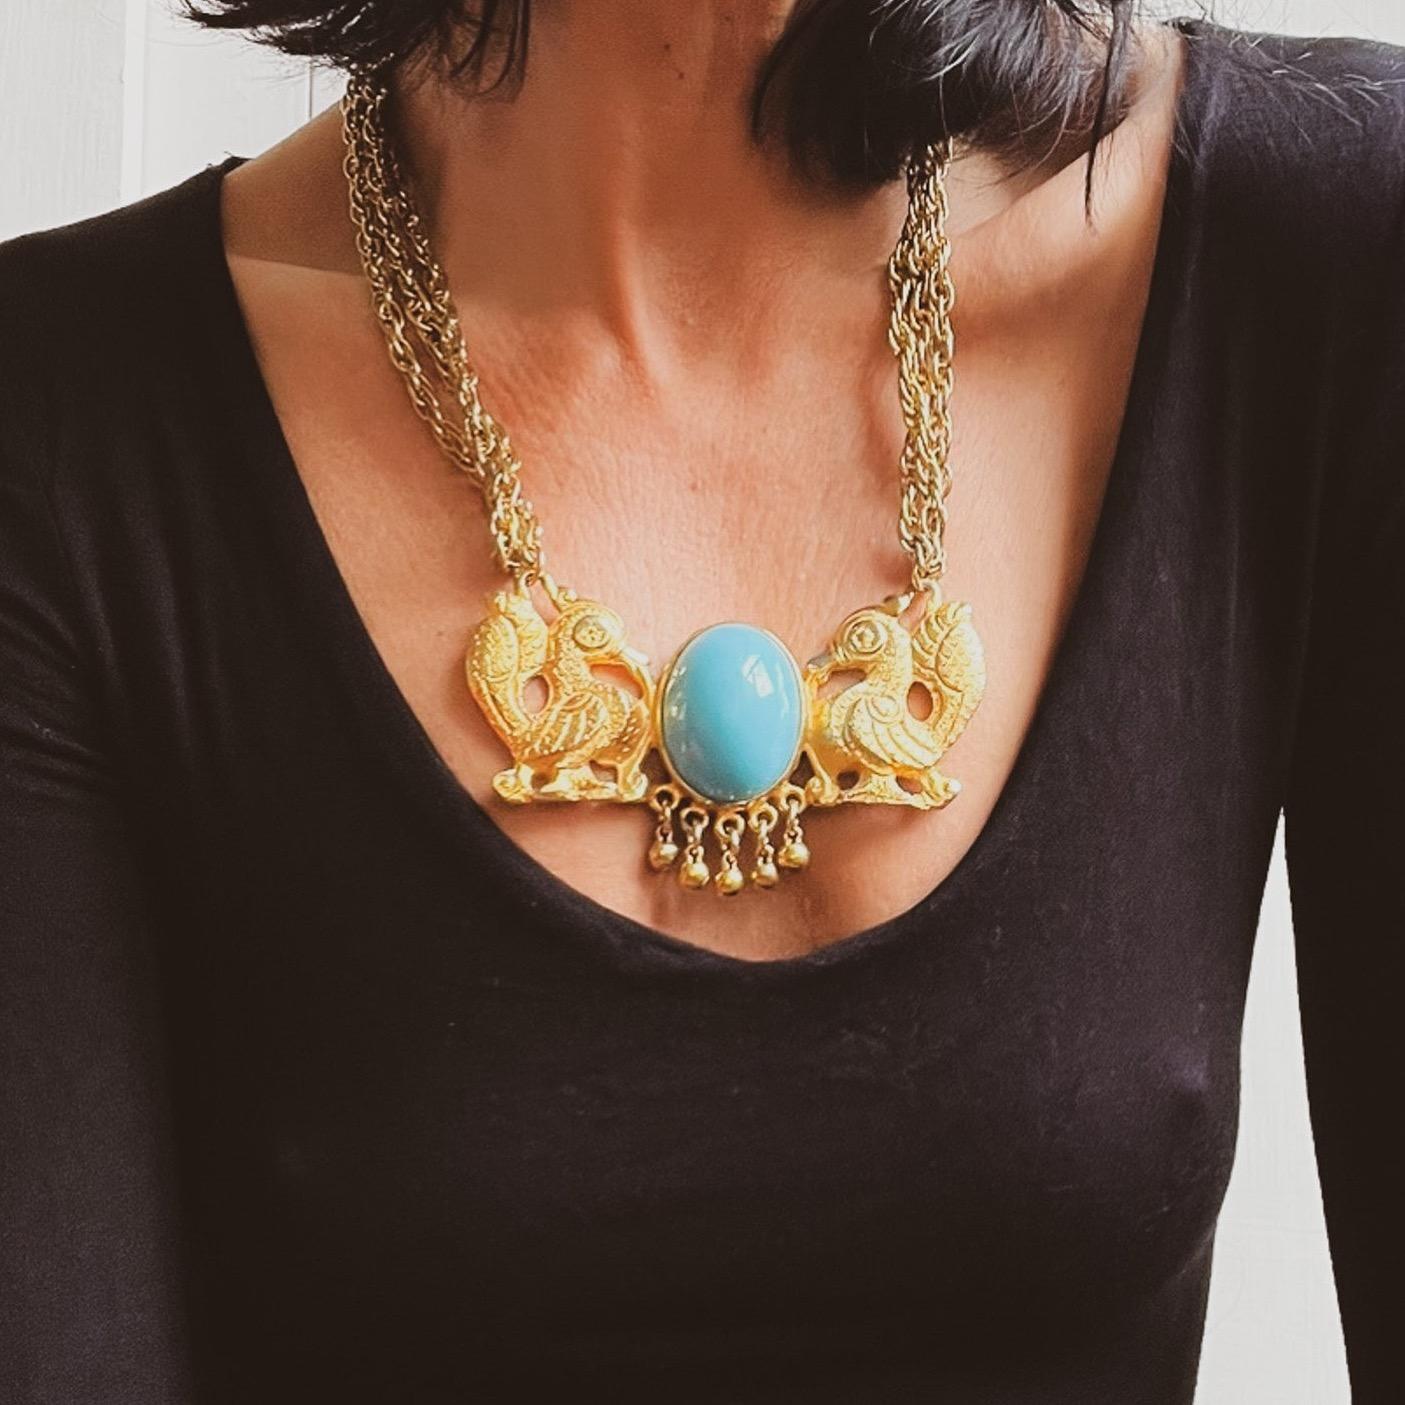 Step back into the grandeur of the 80s, a decade defined by its flamboyant glamour with this incredible vintage necklace, perfectly embodying the Dynasty  more is more era.

This spectacular necklace, the brainchild of Donald Stannard, features a